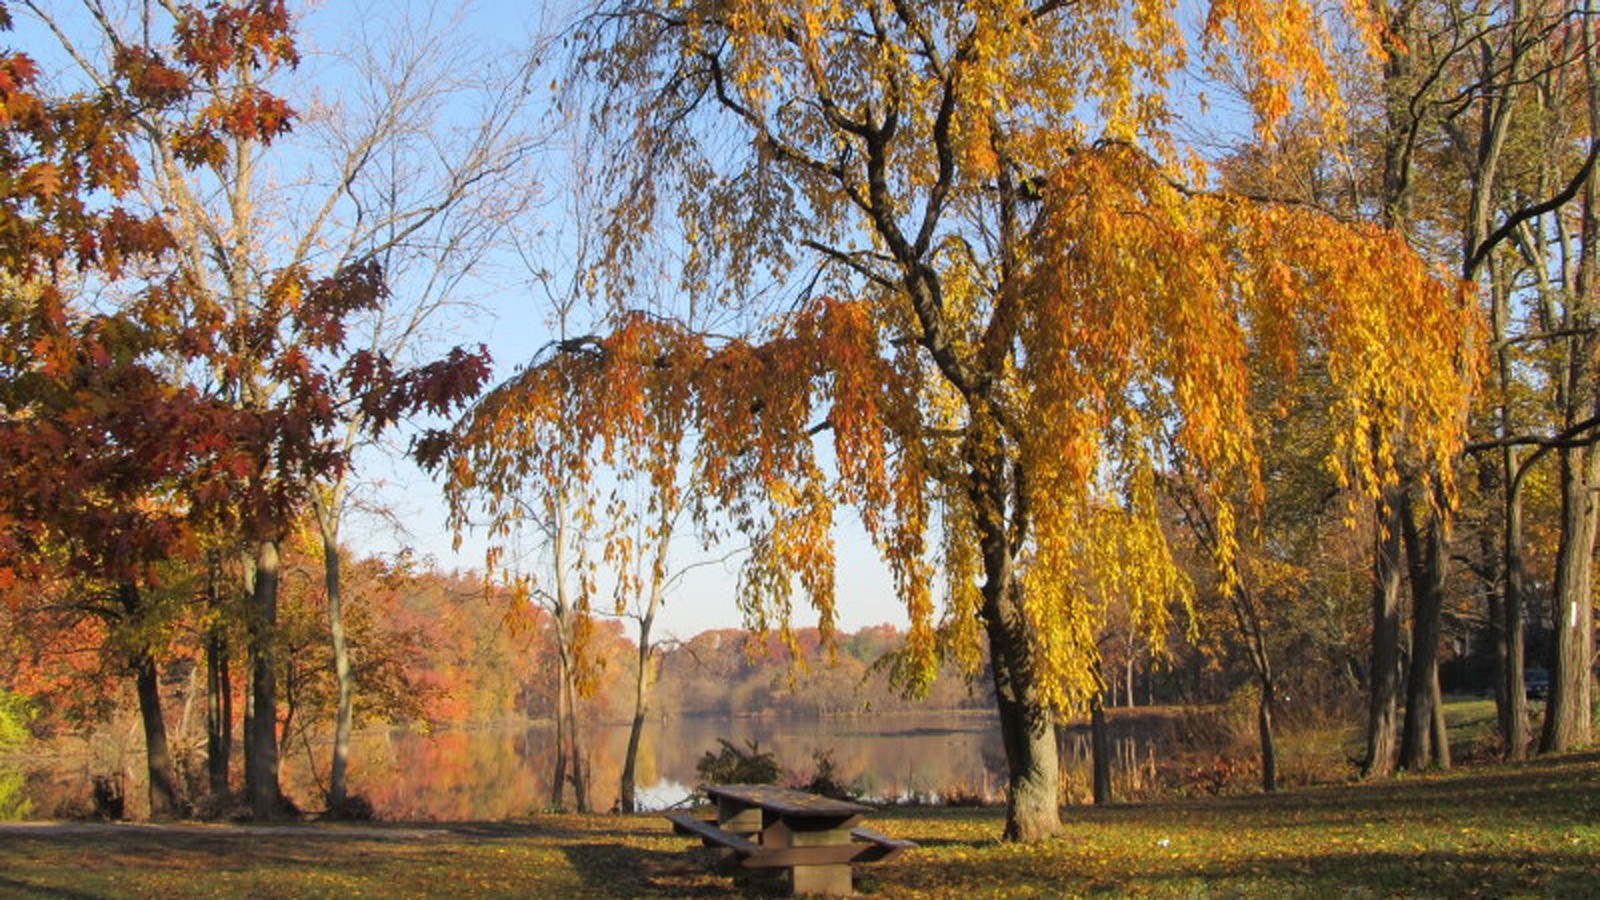 Rahway River Park, designed by Olmsted Brothers - Photo courtesy of The Coalition to Save Historic Rahway River Park, 2015